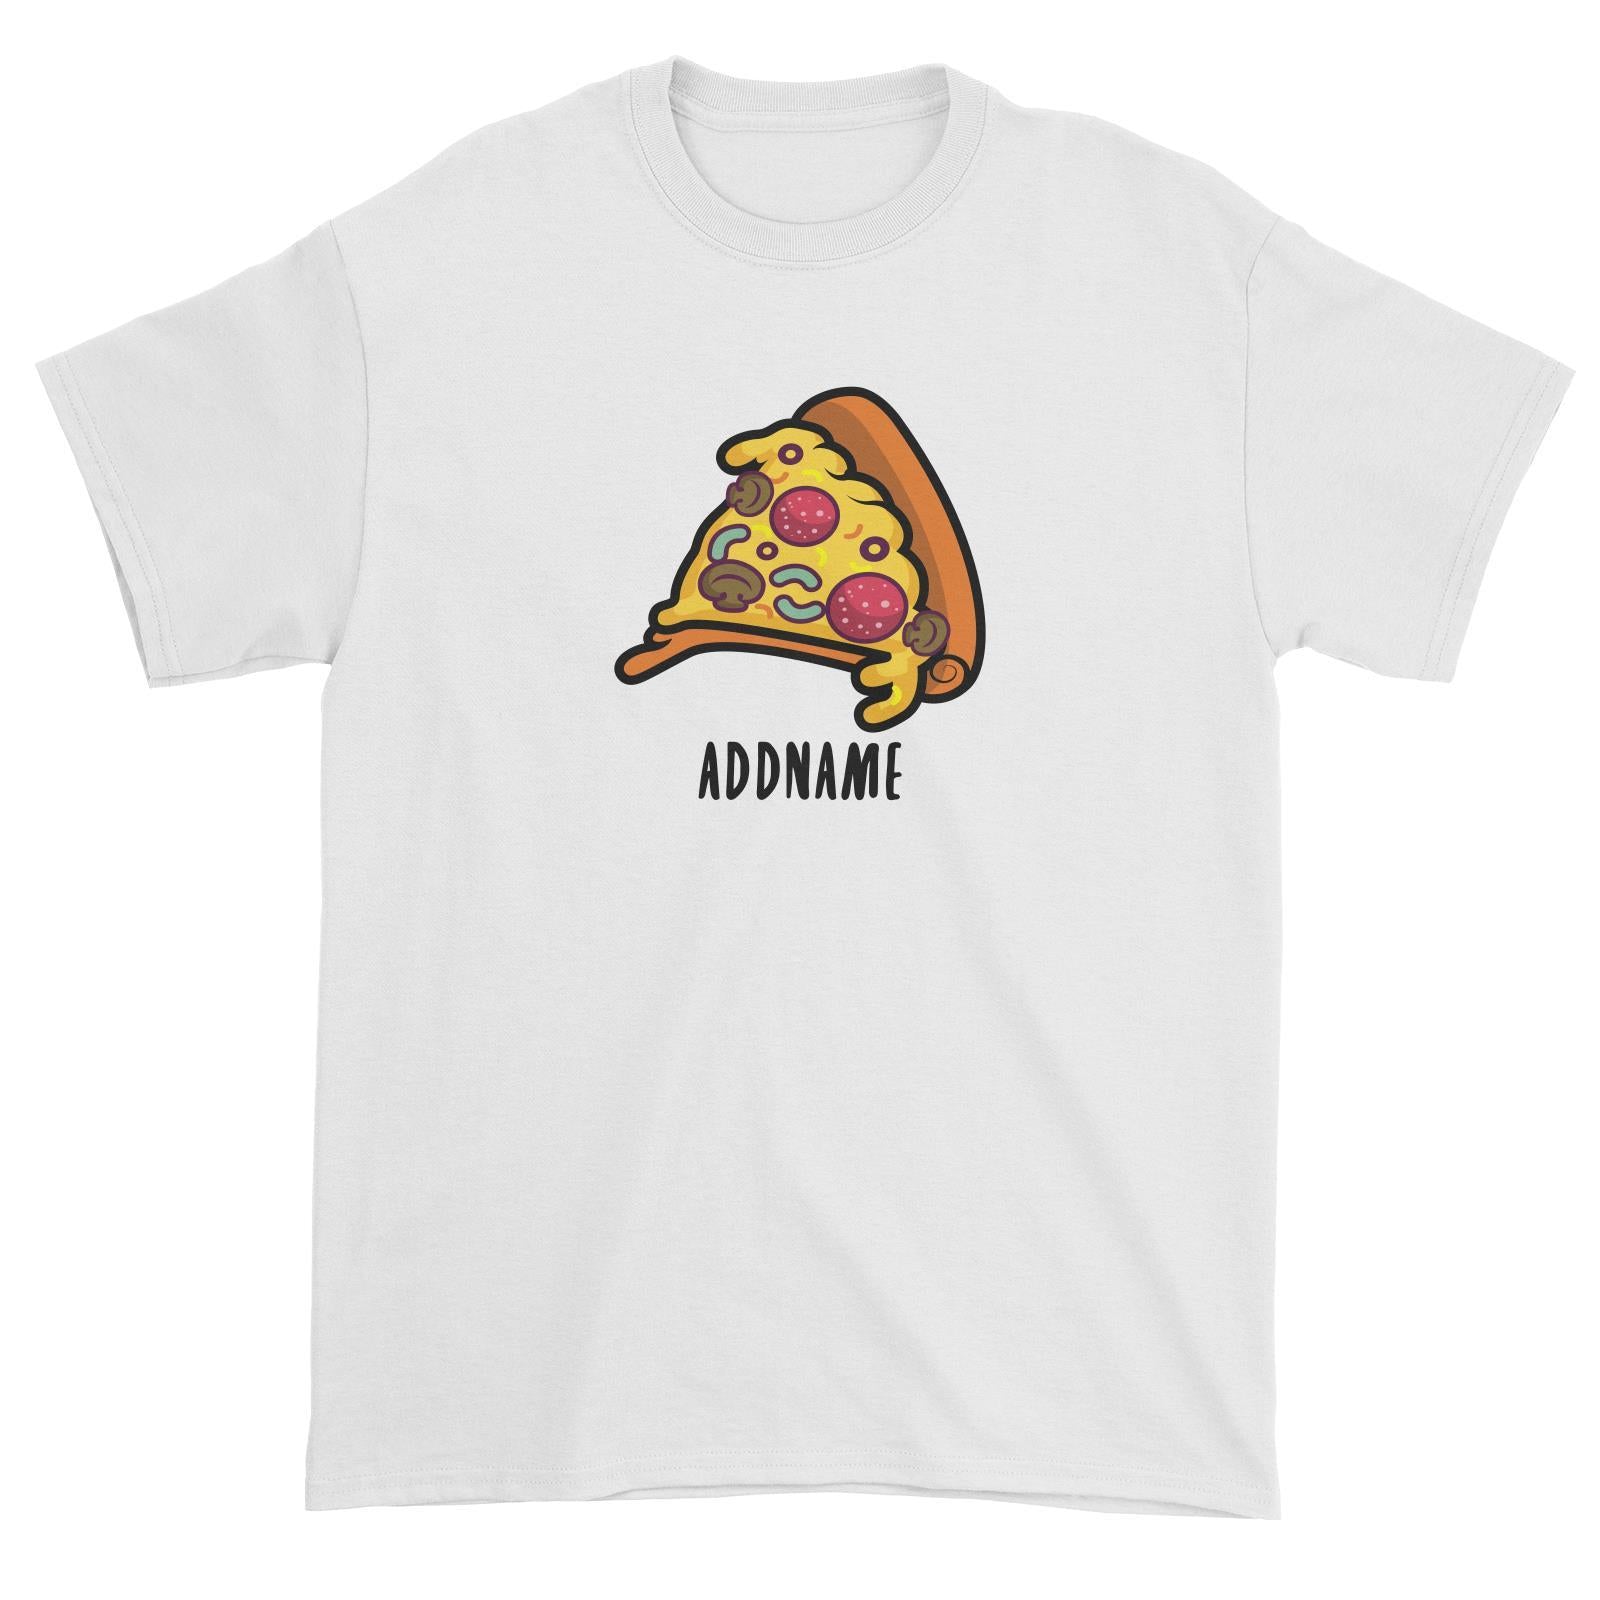 Fast Food Pizza Slice Addname Unisex T-Shirt  Matching Family Comic Cartoon Personalizable Designs